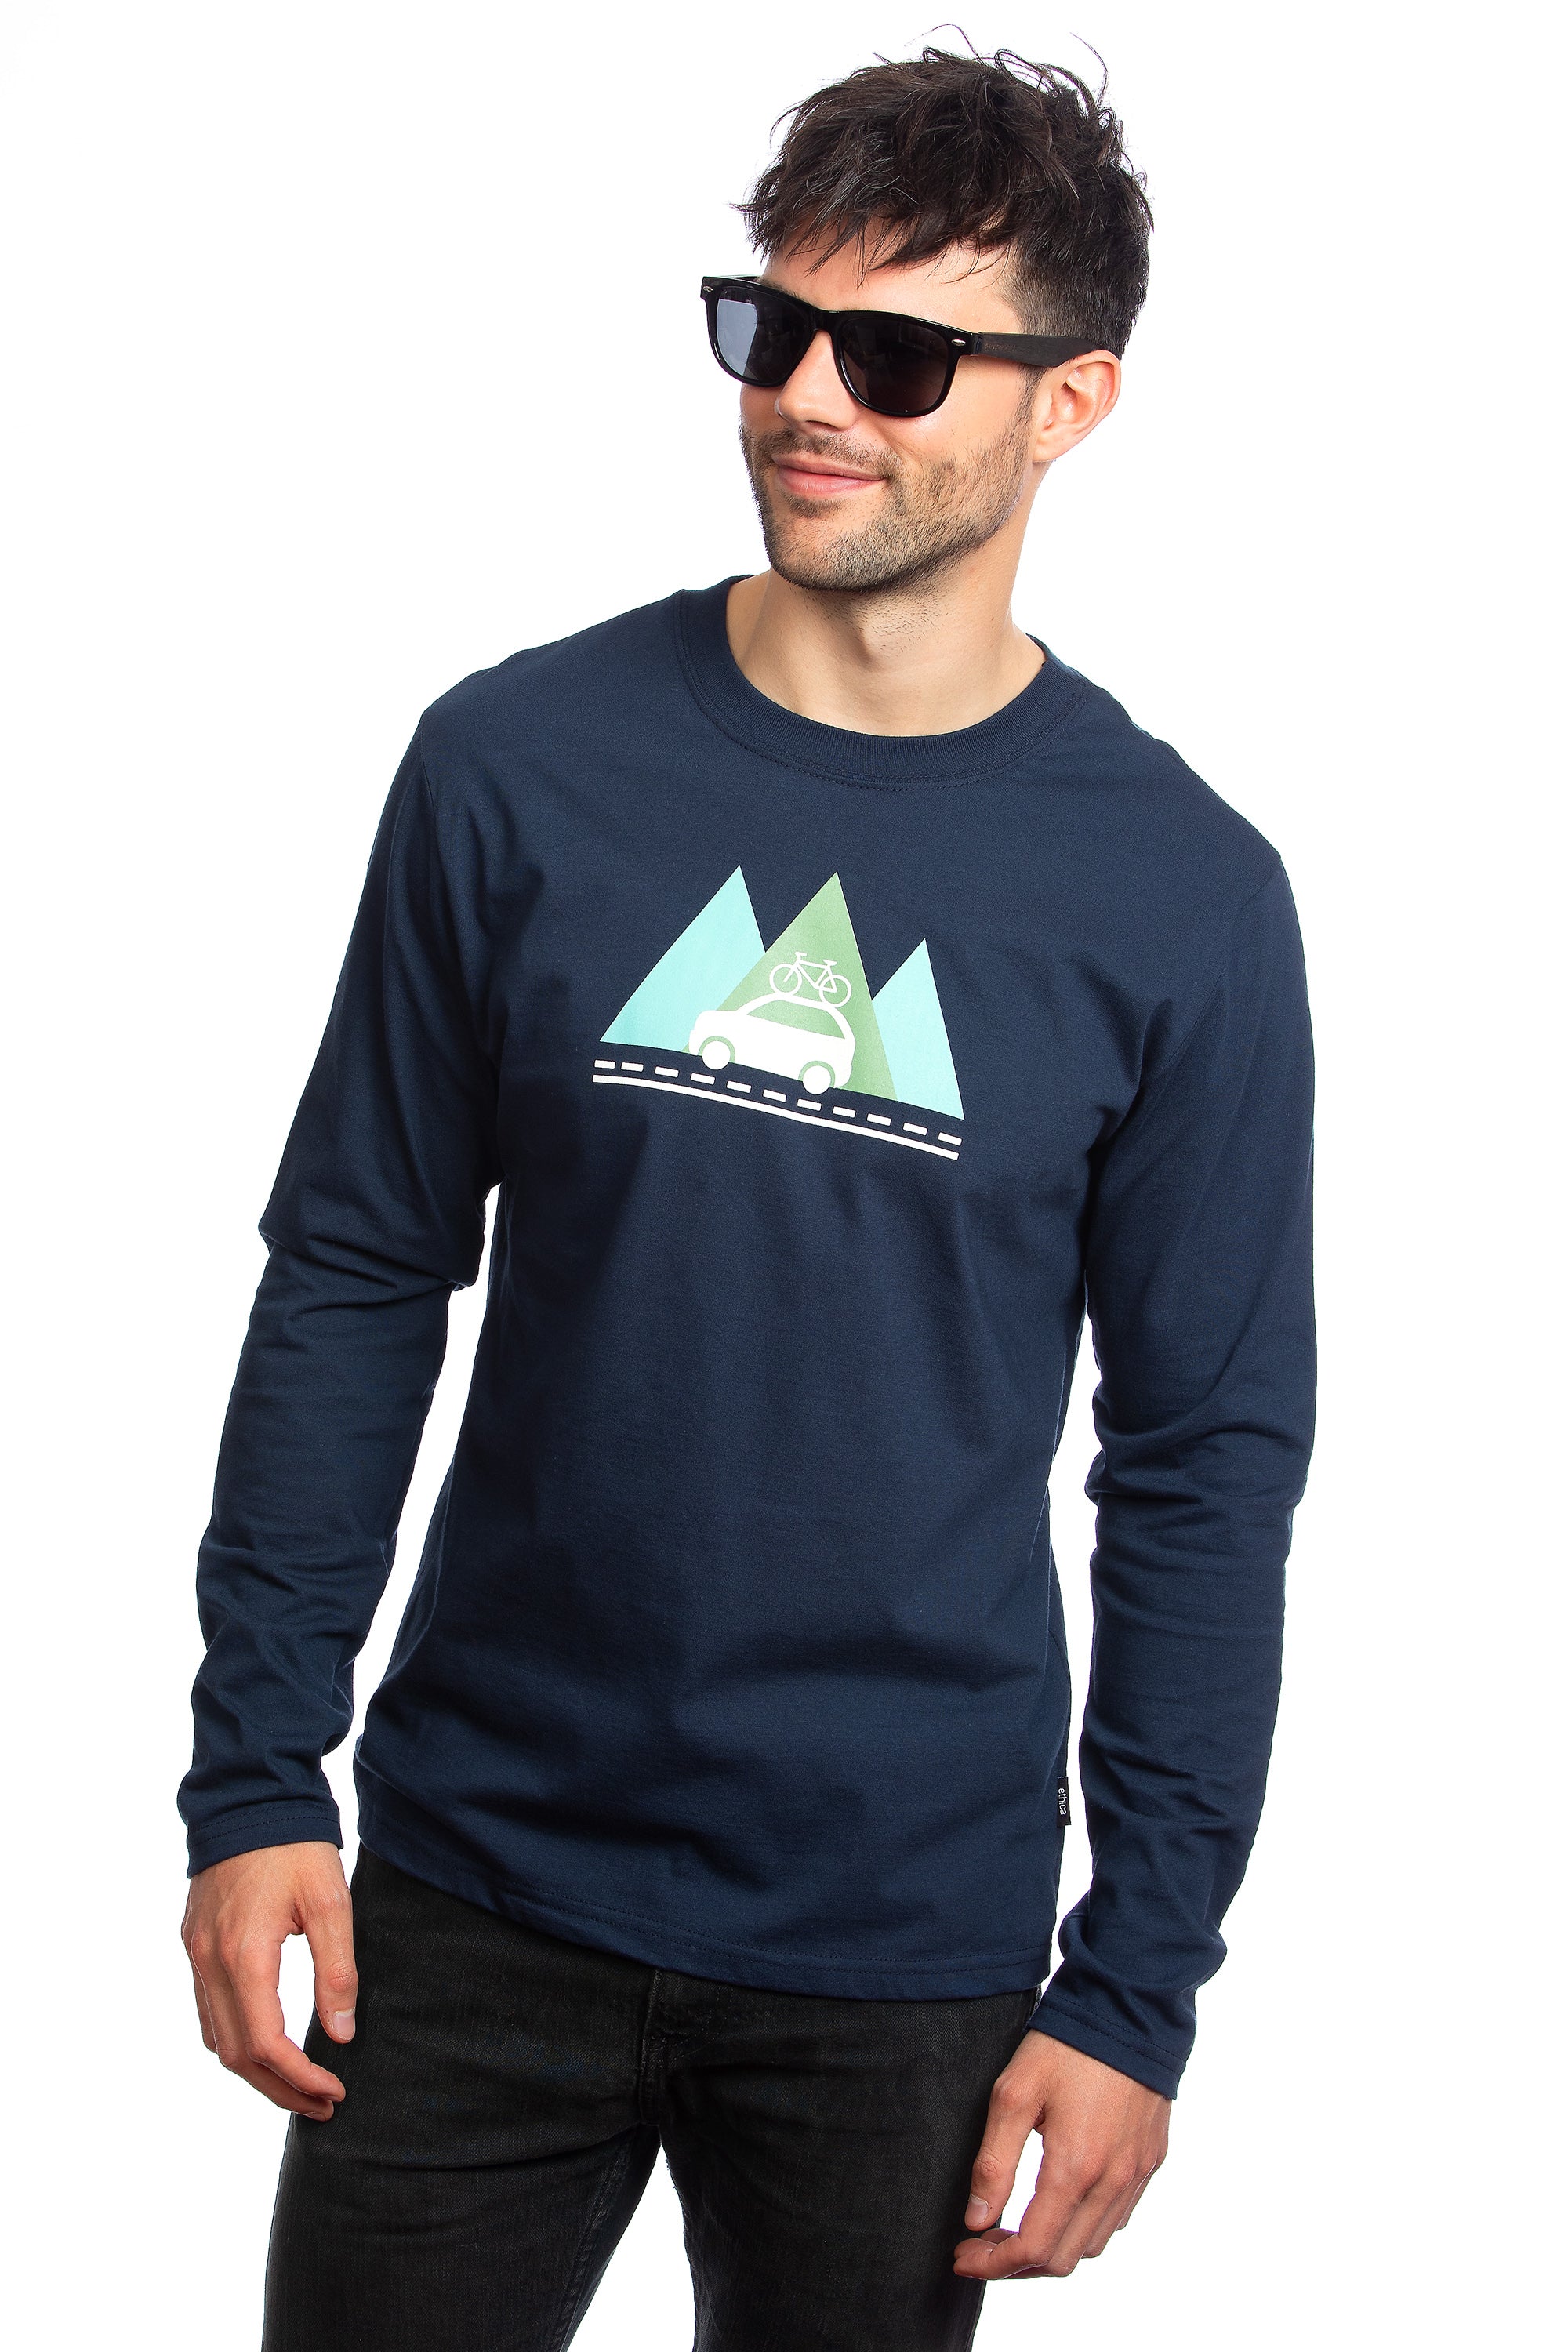 PLB Outdoor Adventure T-shirt Long sleeve. Combed for softness and comfort. Navy / 2XL